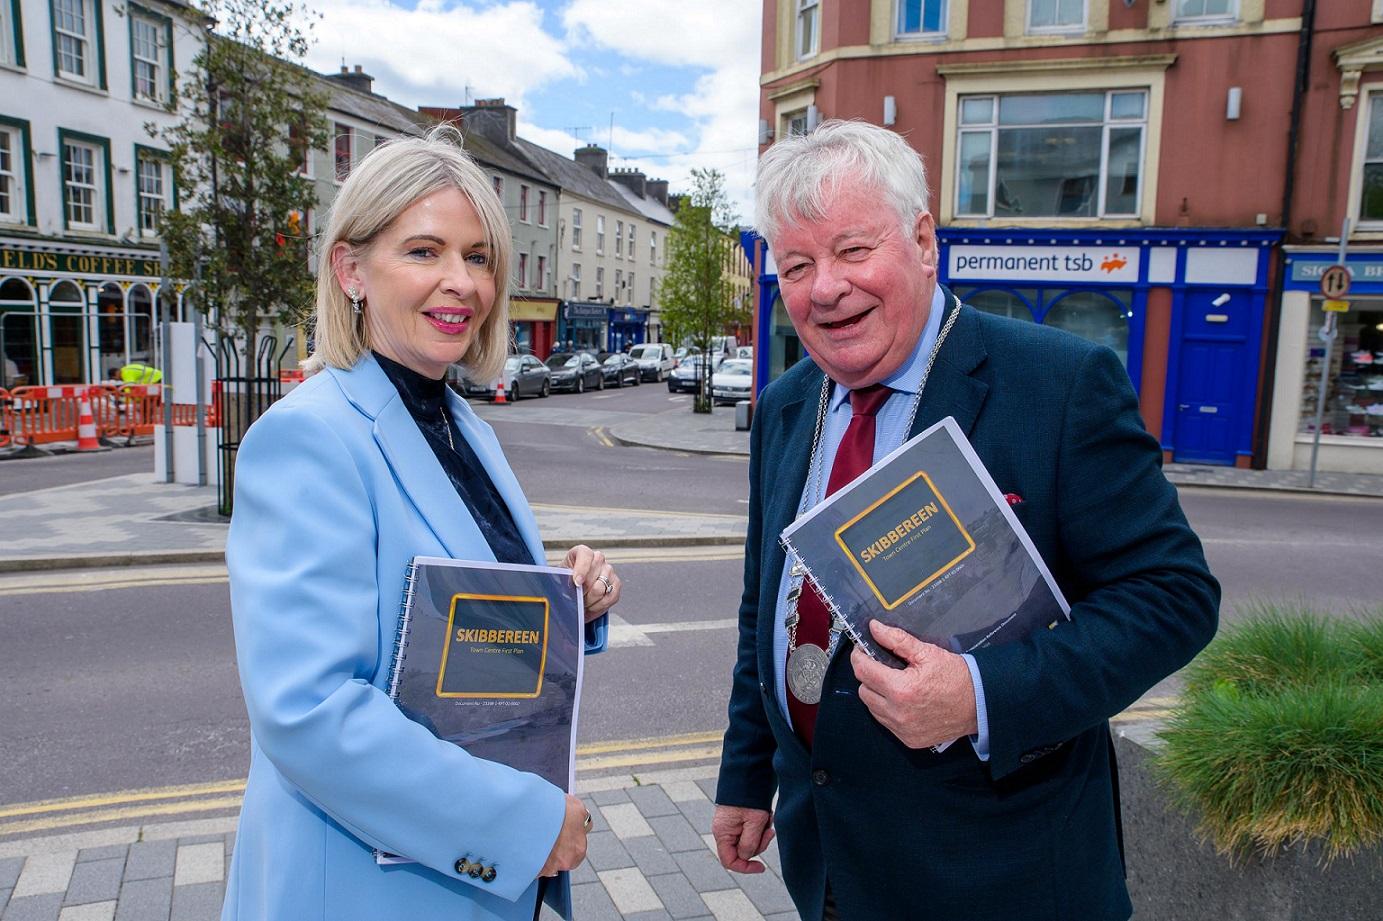 Cork County Council has officially launched its Town Centre First (TCF) Regeneration Plan for Skibbereen. The ambitious but pragmatic plan for Skibbereen Town Centre represents the culmination of significant public consultation by Cork County Council as part of the national Town Centre First policy initiative. Pictured: Chief Executive of Cork County Council, Valerie O’Sullivan and Cllr. Joe Carroll, Chairperson of the West Cork Municipal District. 